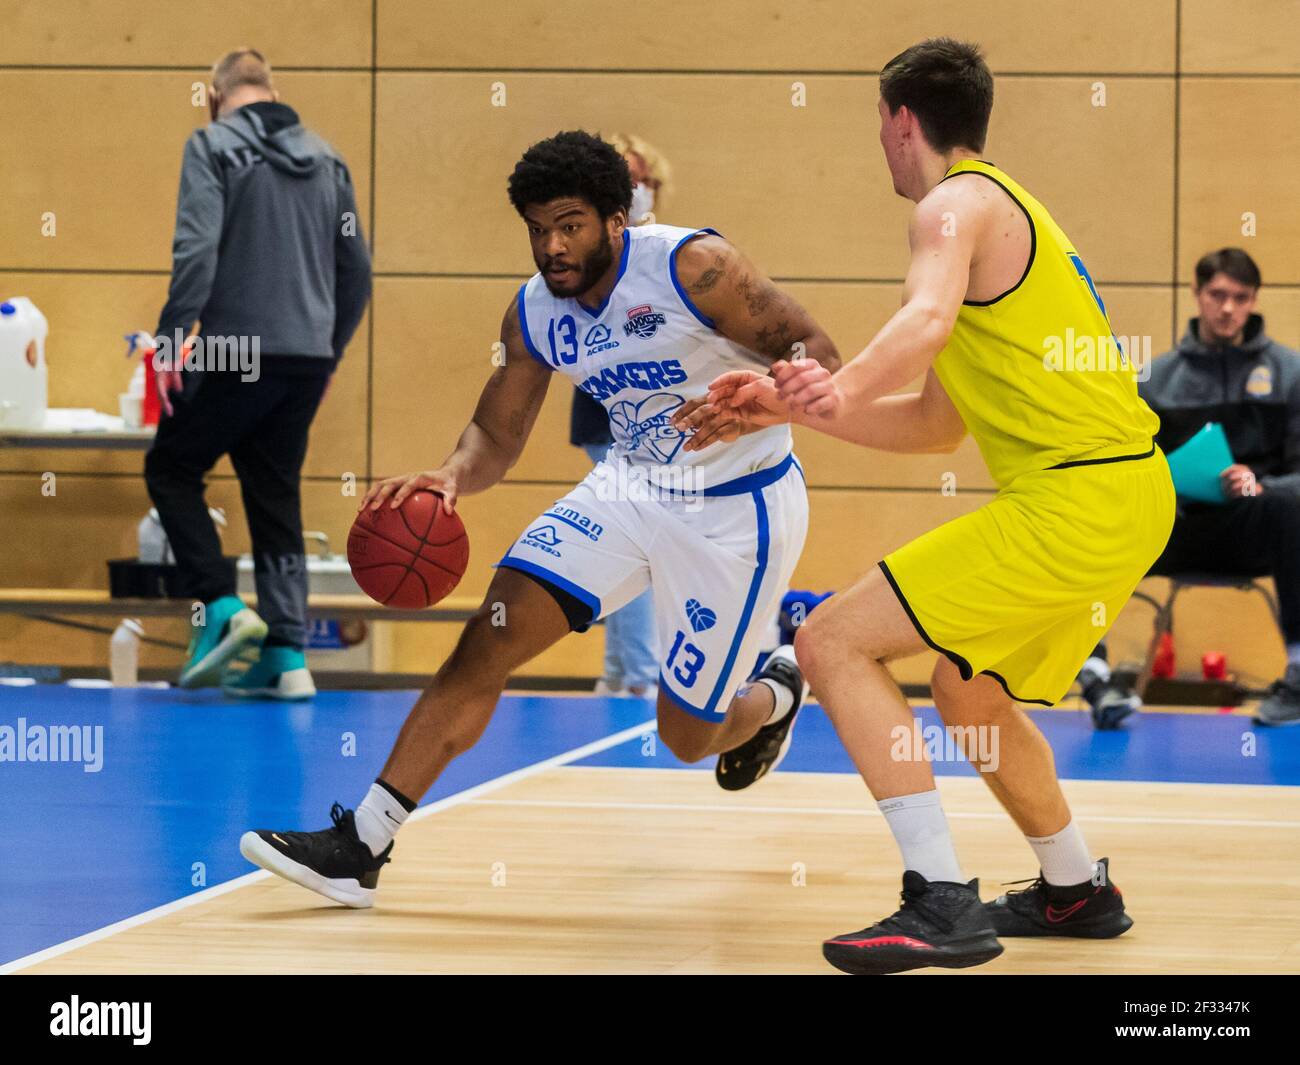 ZWOLLE, NETHERLANDS - MARCH 14: Kayel Locke of Landstede Hammers Zwolle  during the Dutch Basketball League match between Landstede Hammers and Den  Hel Stock Photo - Alamy